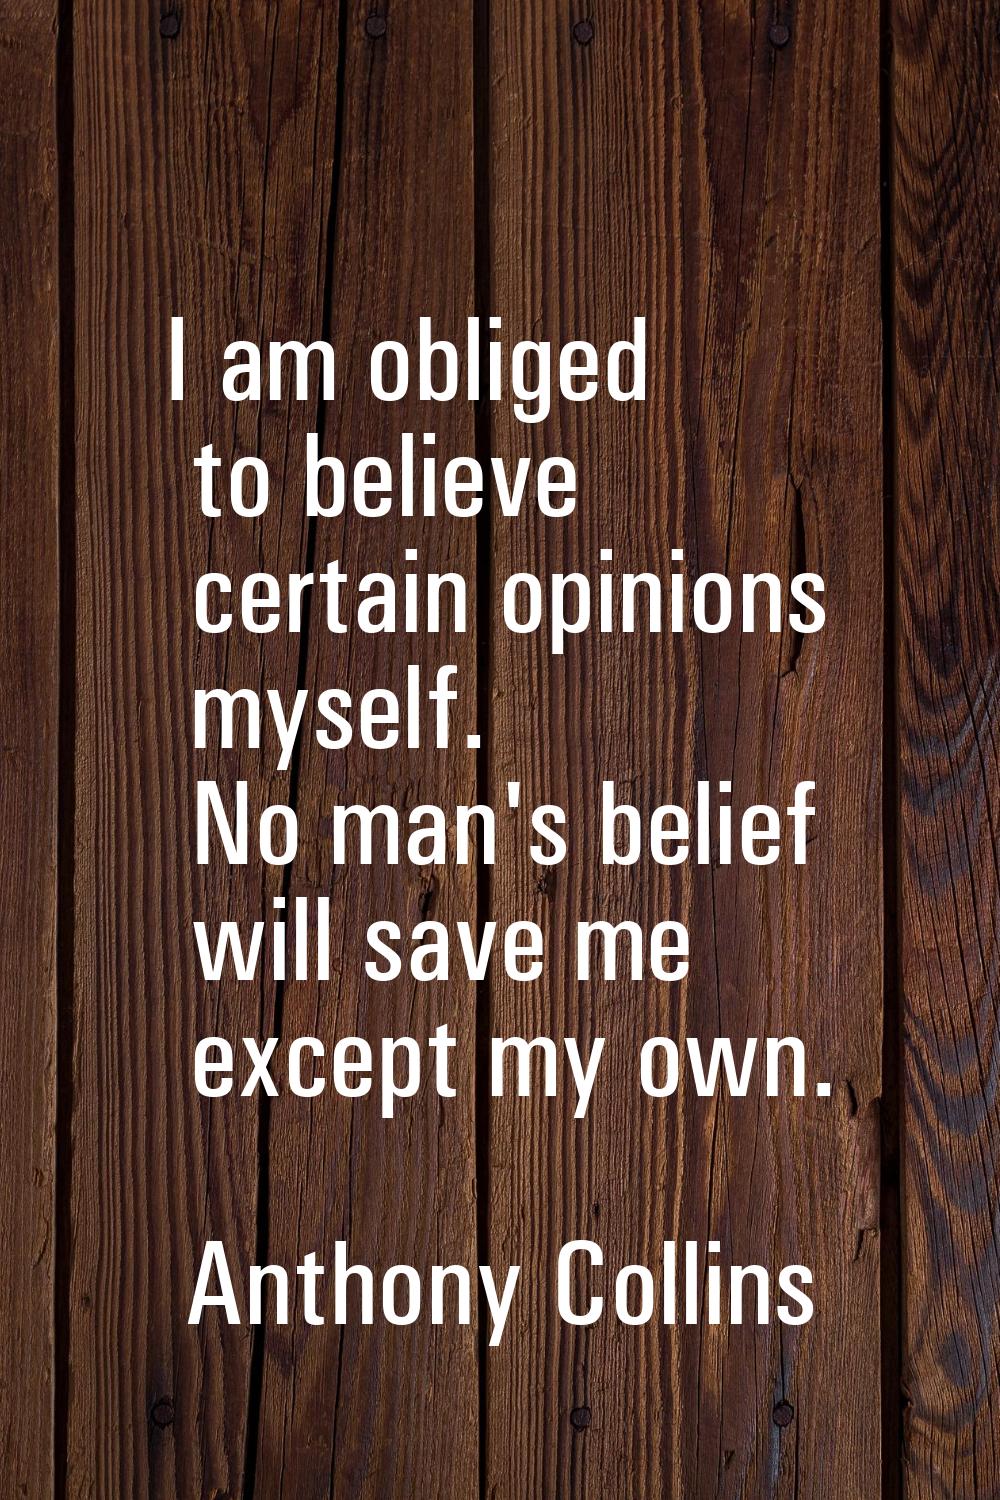 I am obliged to believe certain opinions myself. No man's belief will save me except my own.